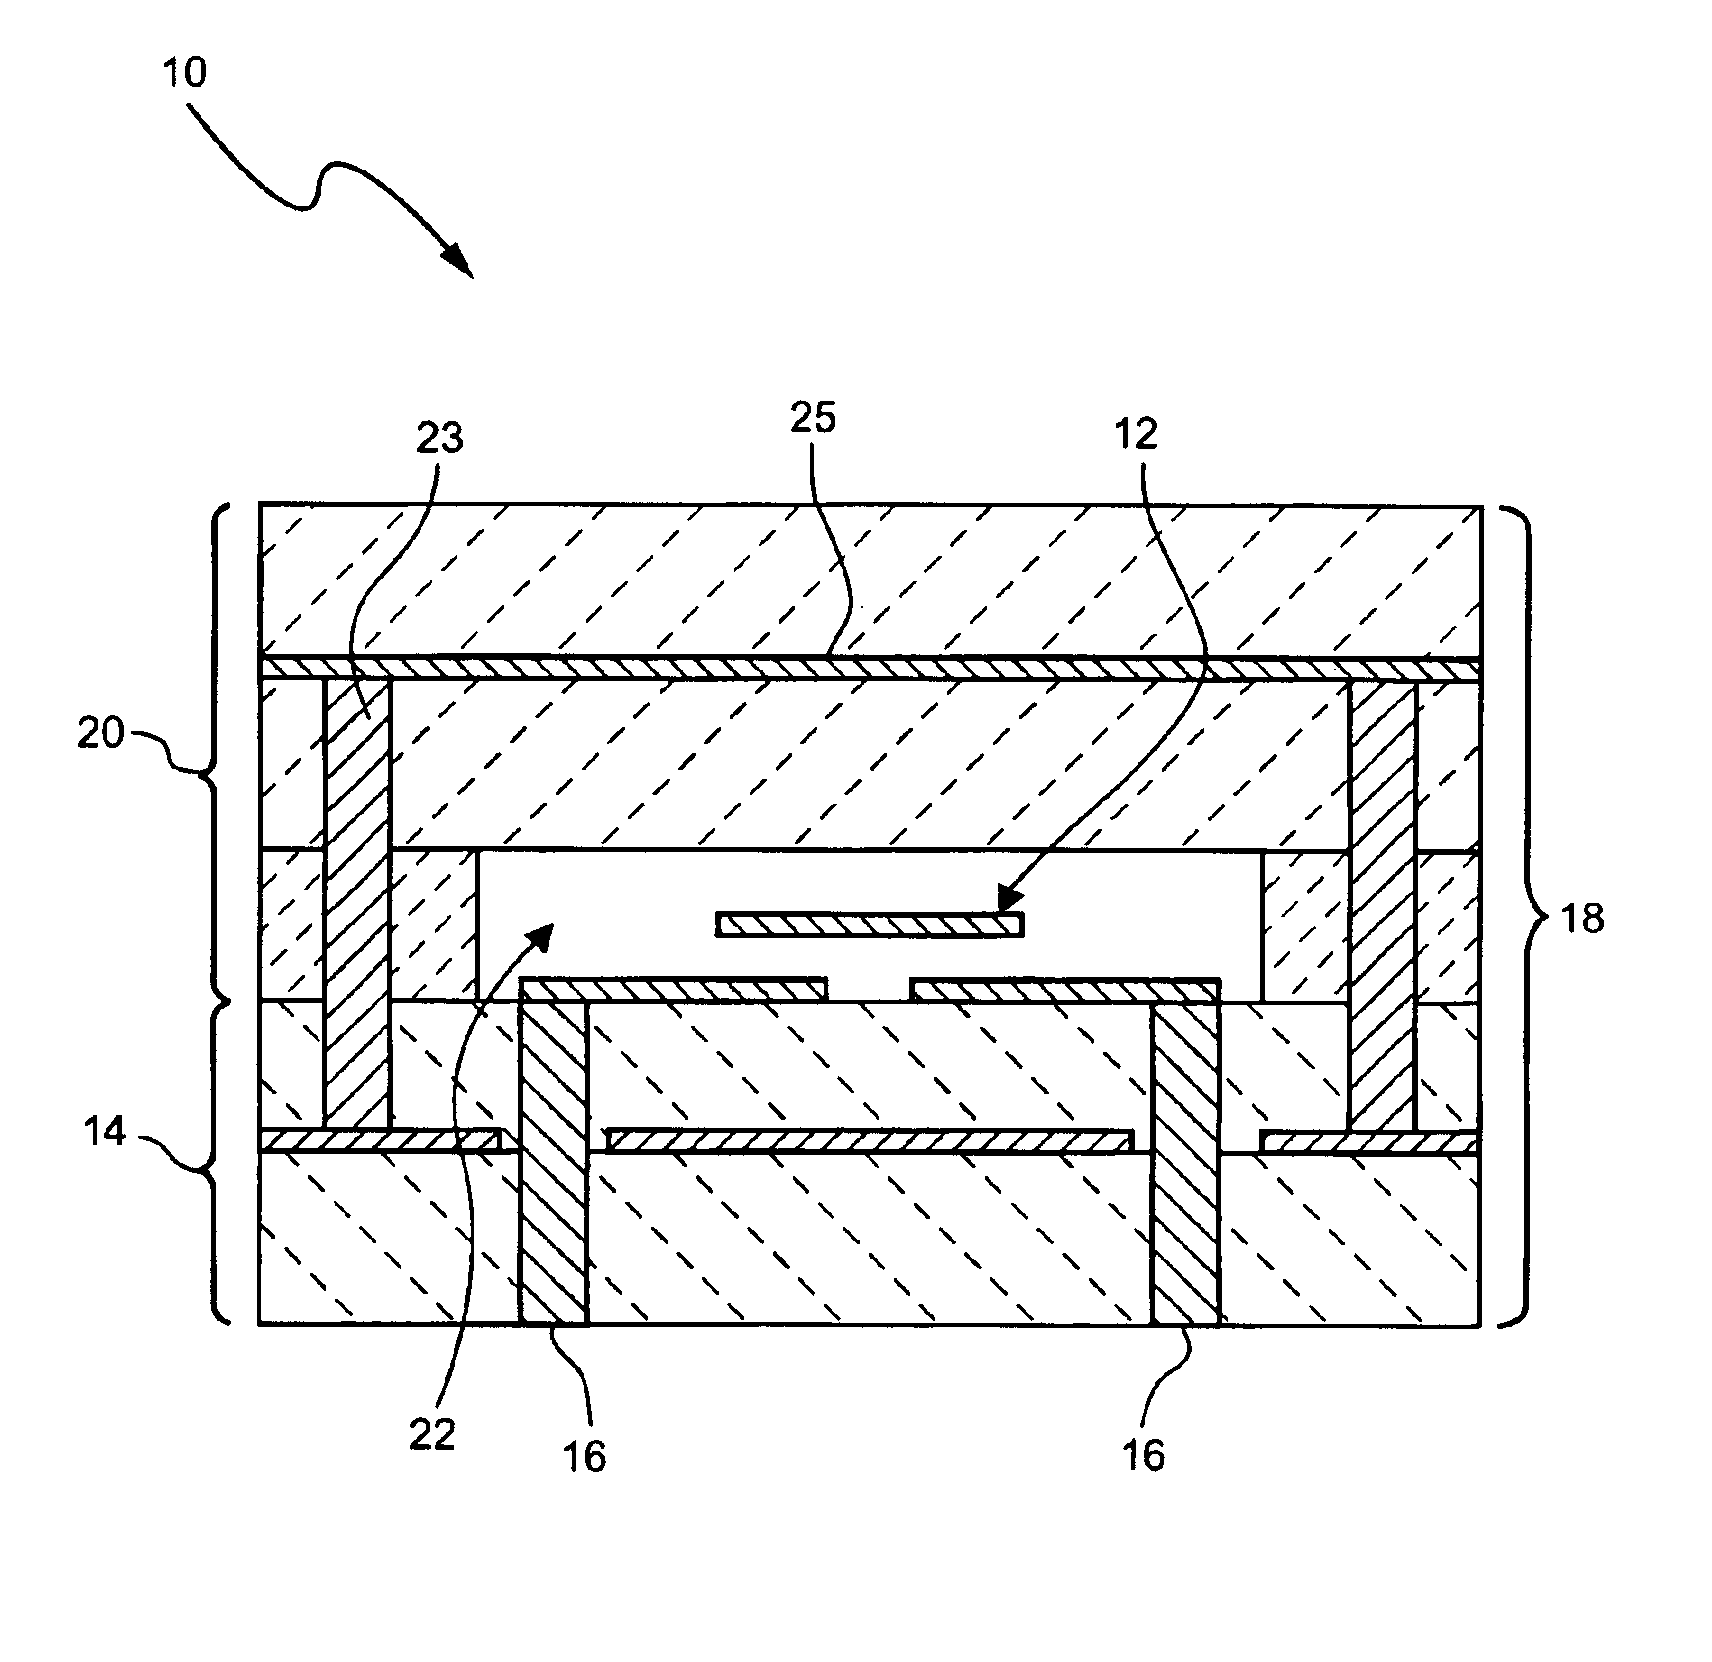 MEMS-based variable capacitor